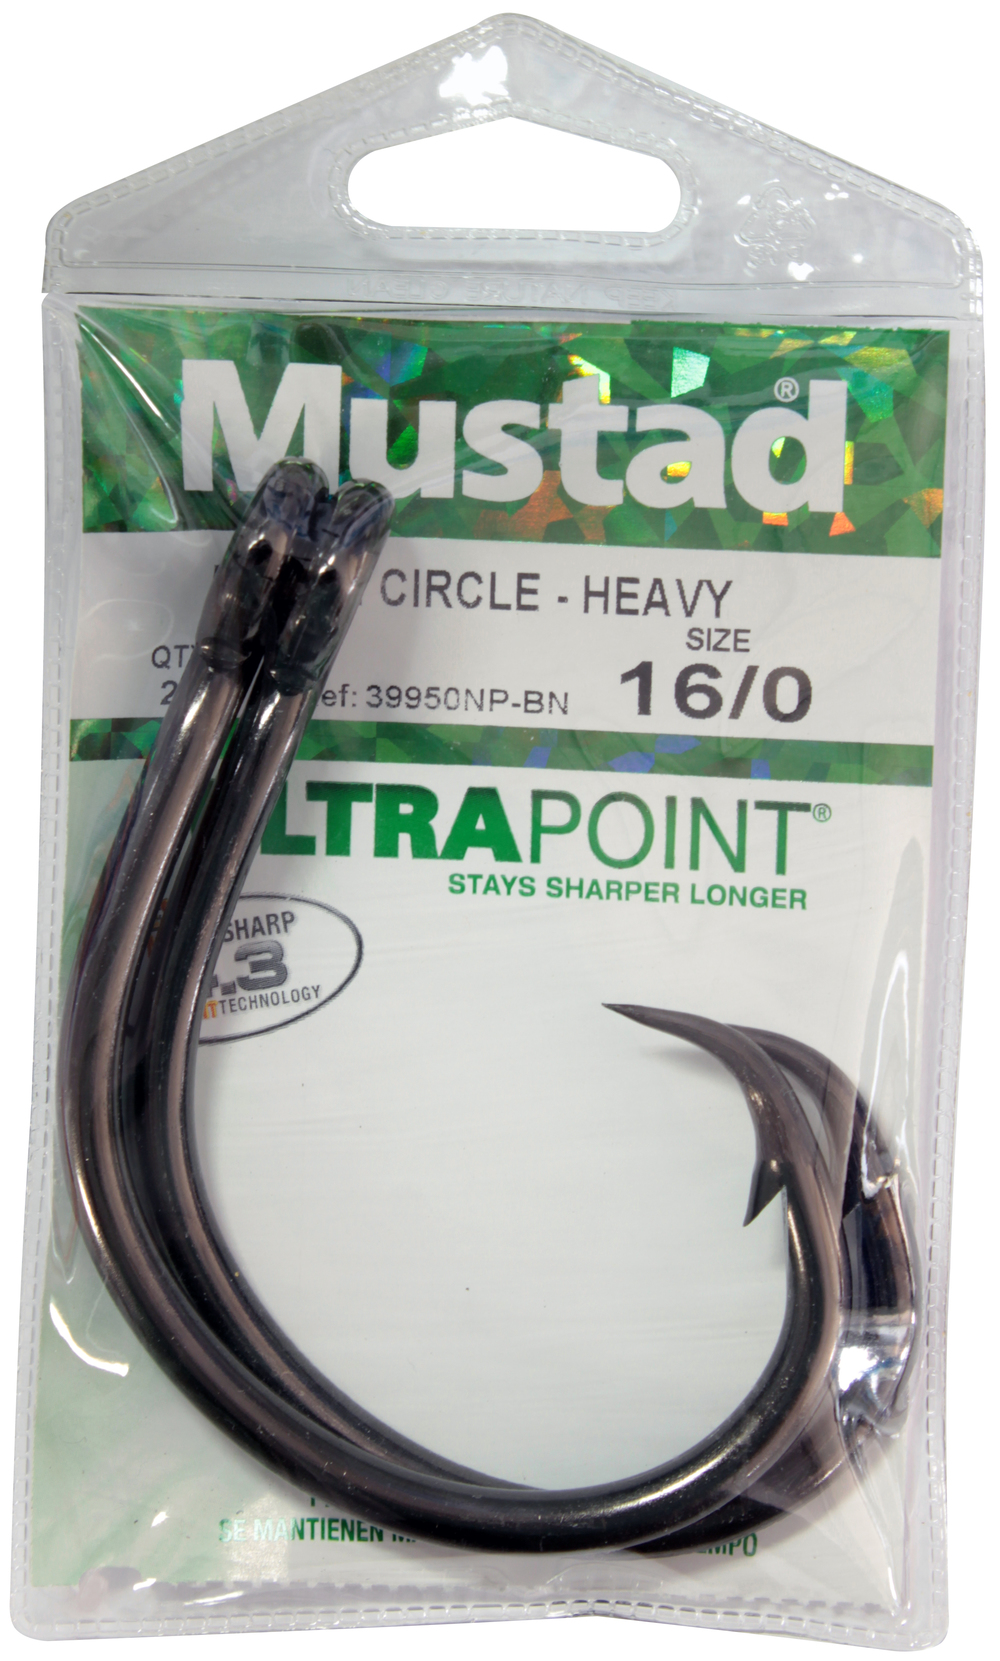 Mustad 39940NP-BN Demon Perfect Circle Hooks Size 1/0 Jagged Tooth Tackle